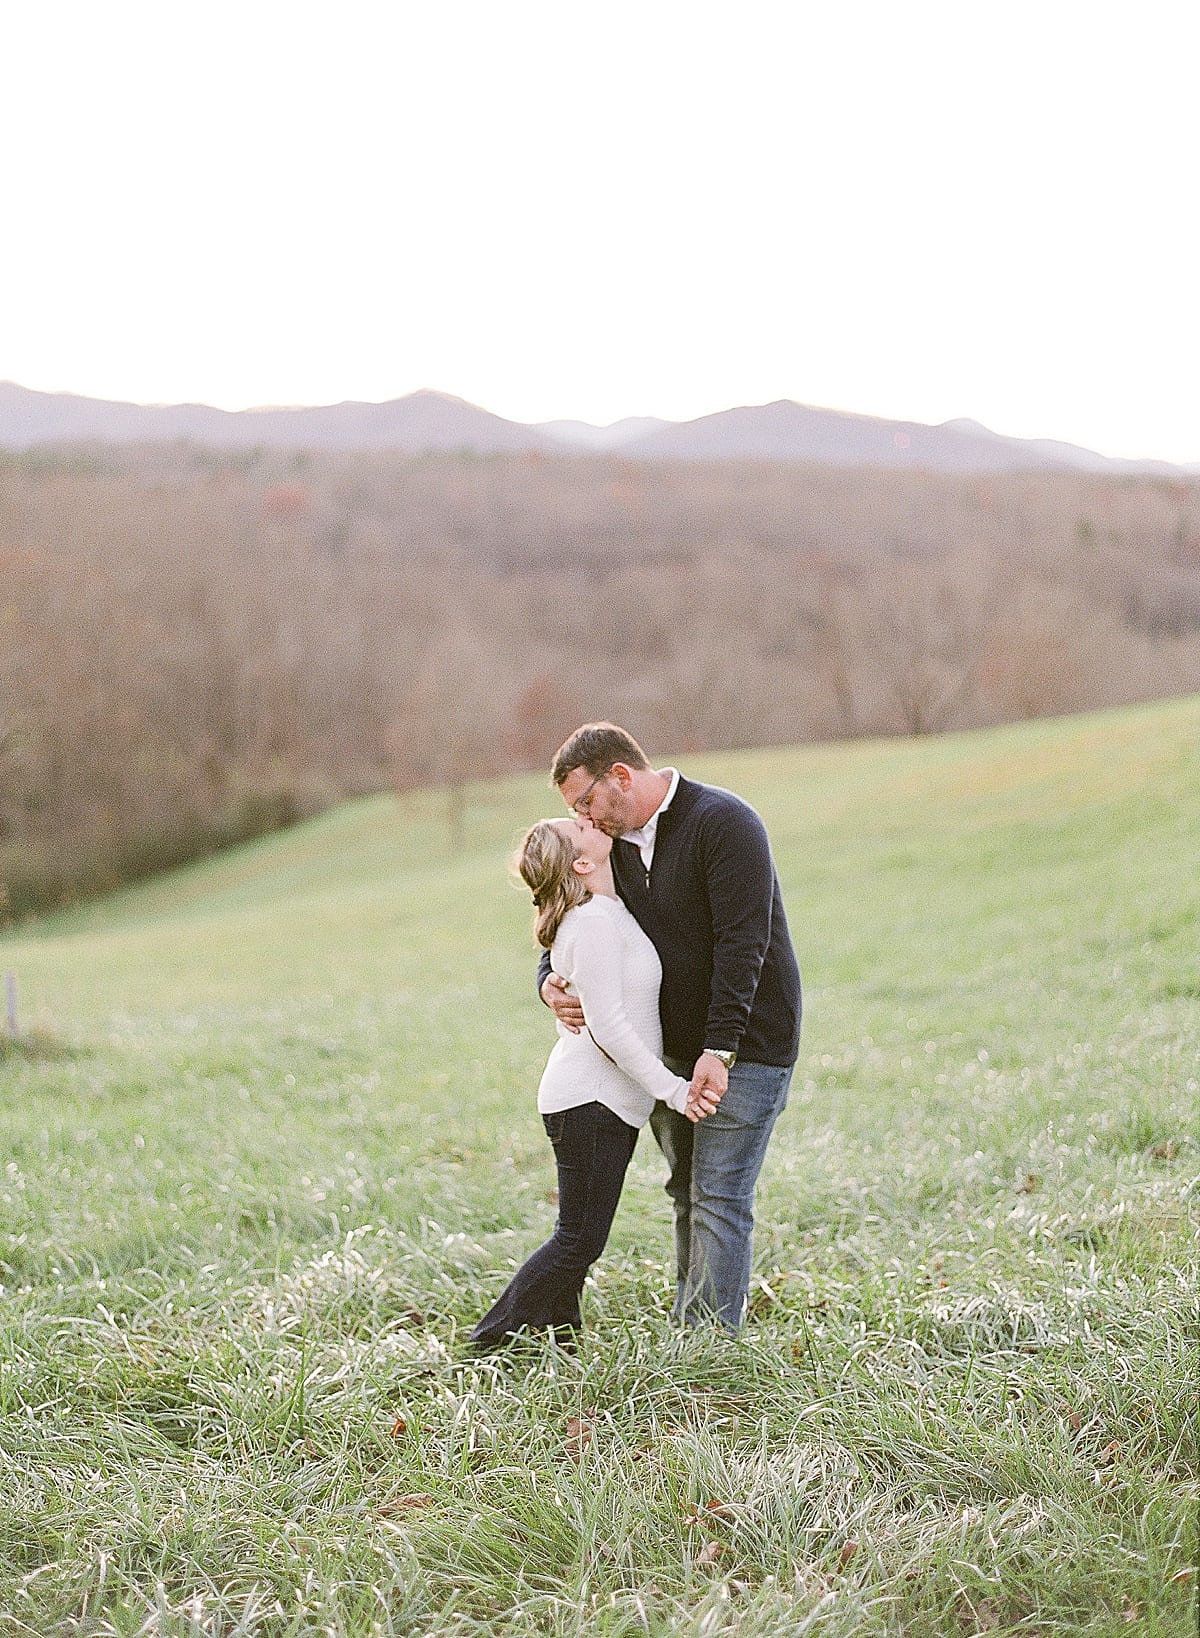 Couple Kissing in Field Photo